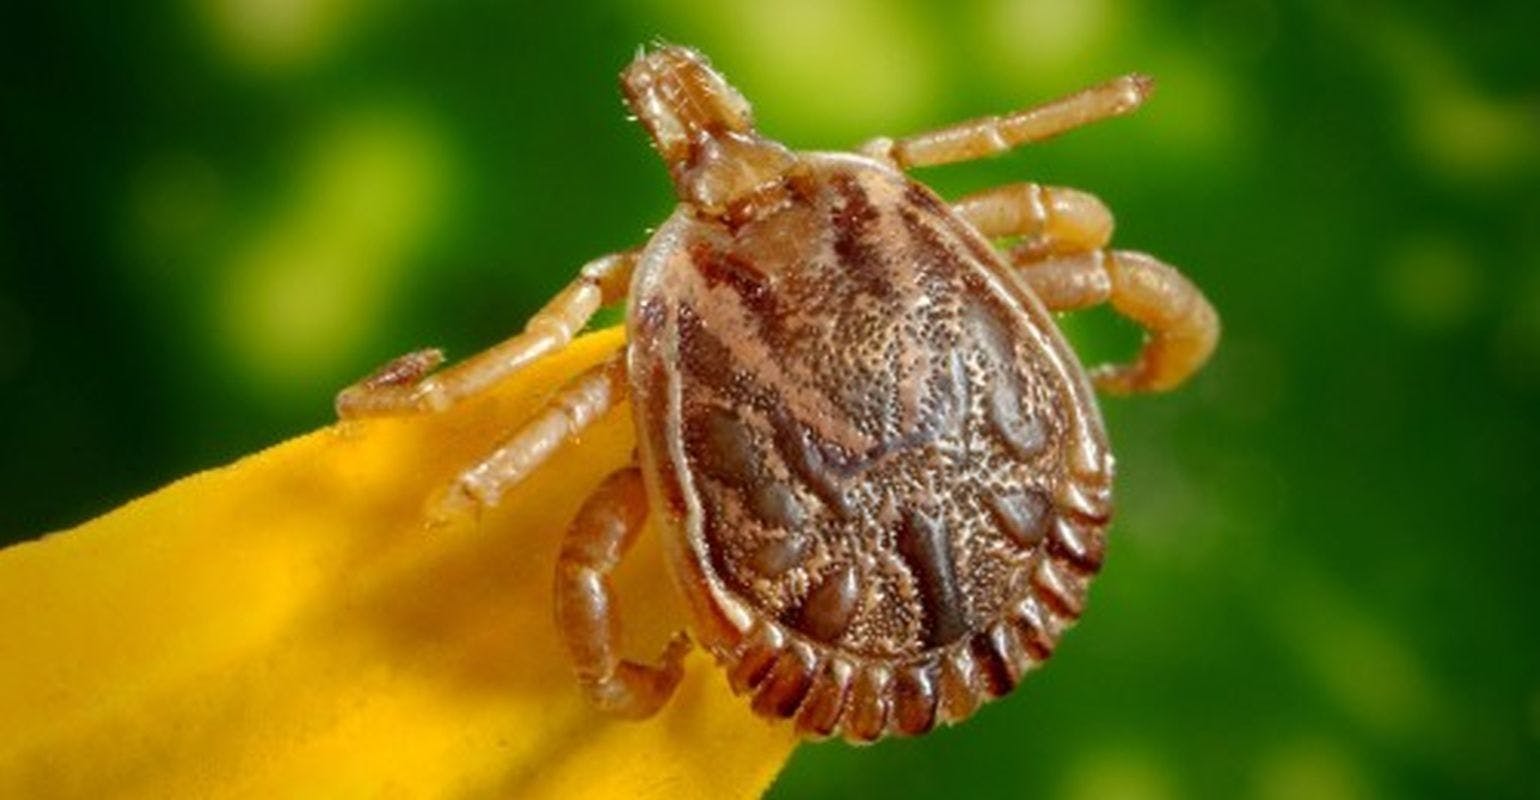 How Urbanization Affects Spread of Lyme Disease